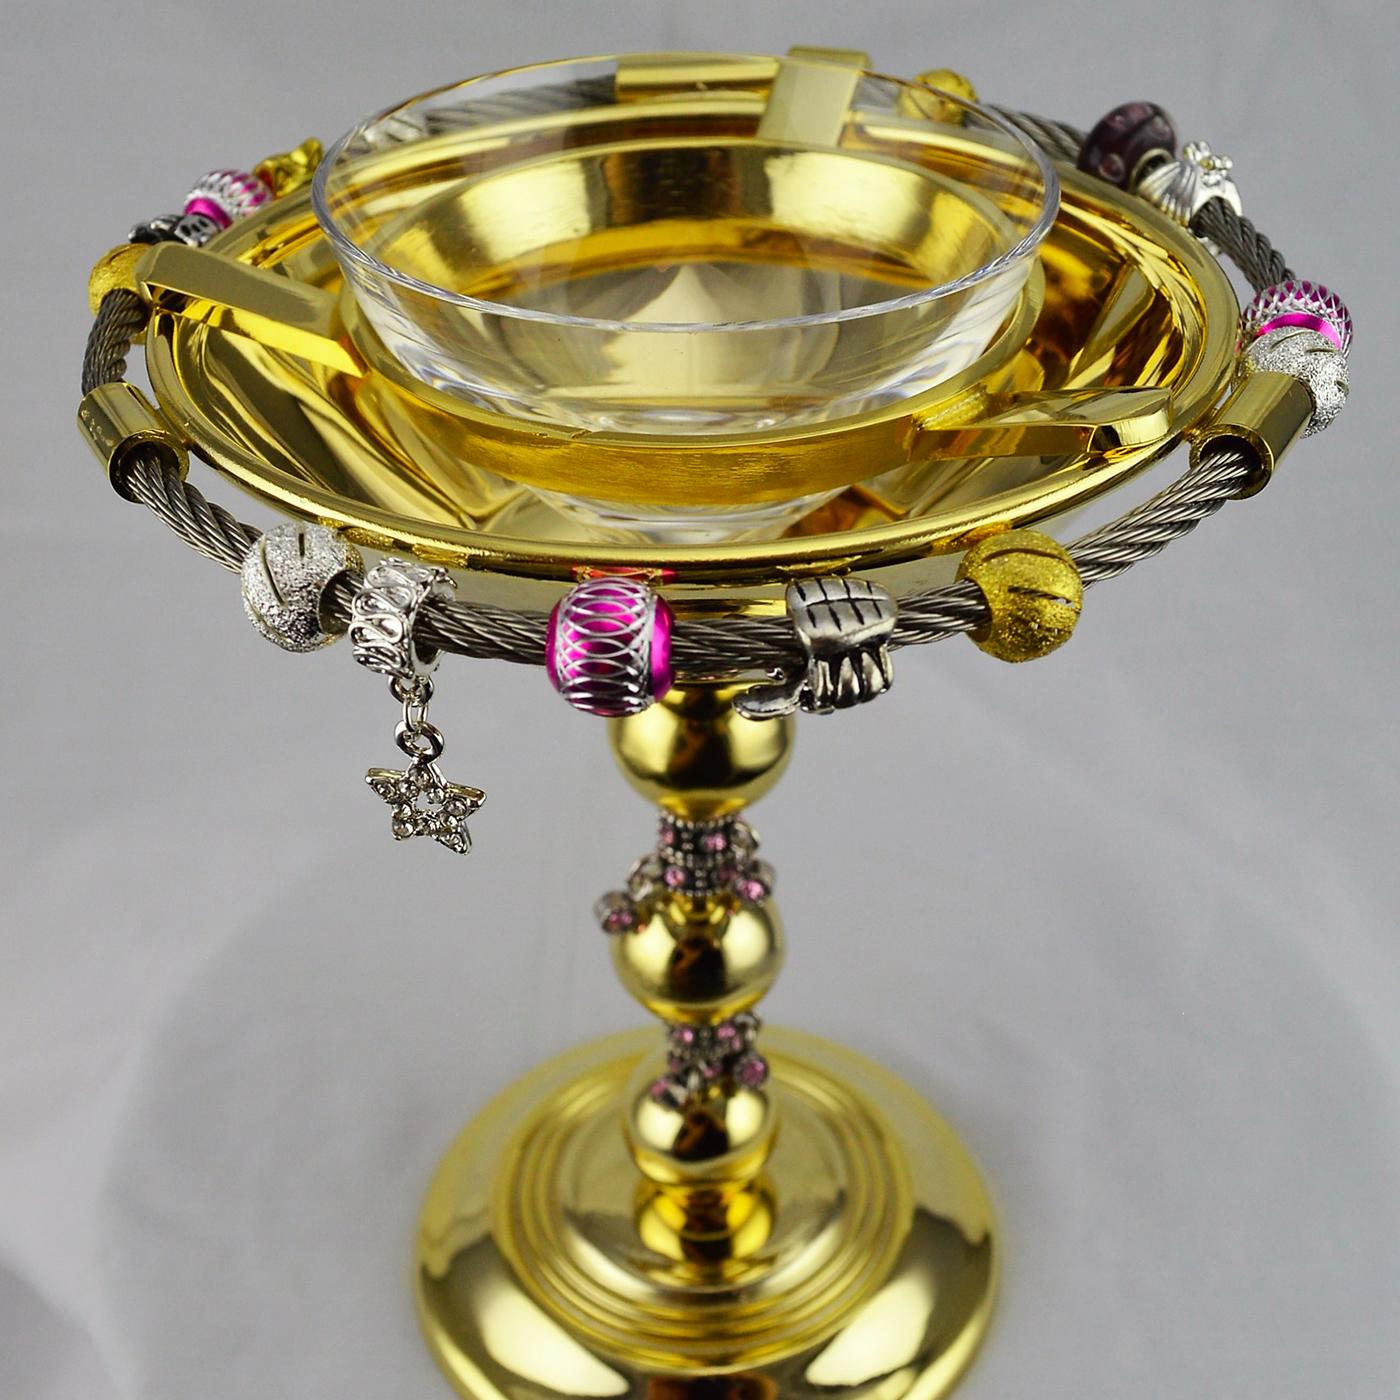 Sumptuous and elegant, this caviar bowl will add a special accent to a lavish dinner. Its dynamic silhouette is made of gold-finished metal with the addition of a series of charms on the stem and around the rim that add a playful accent to the